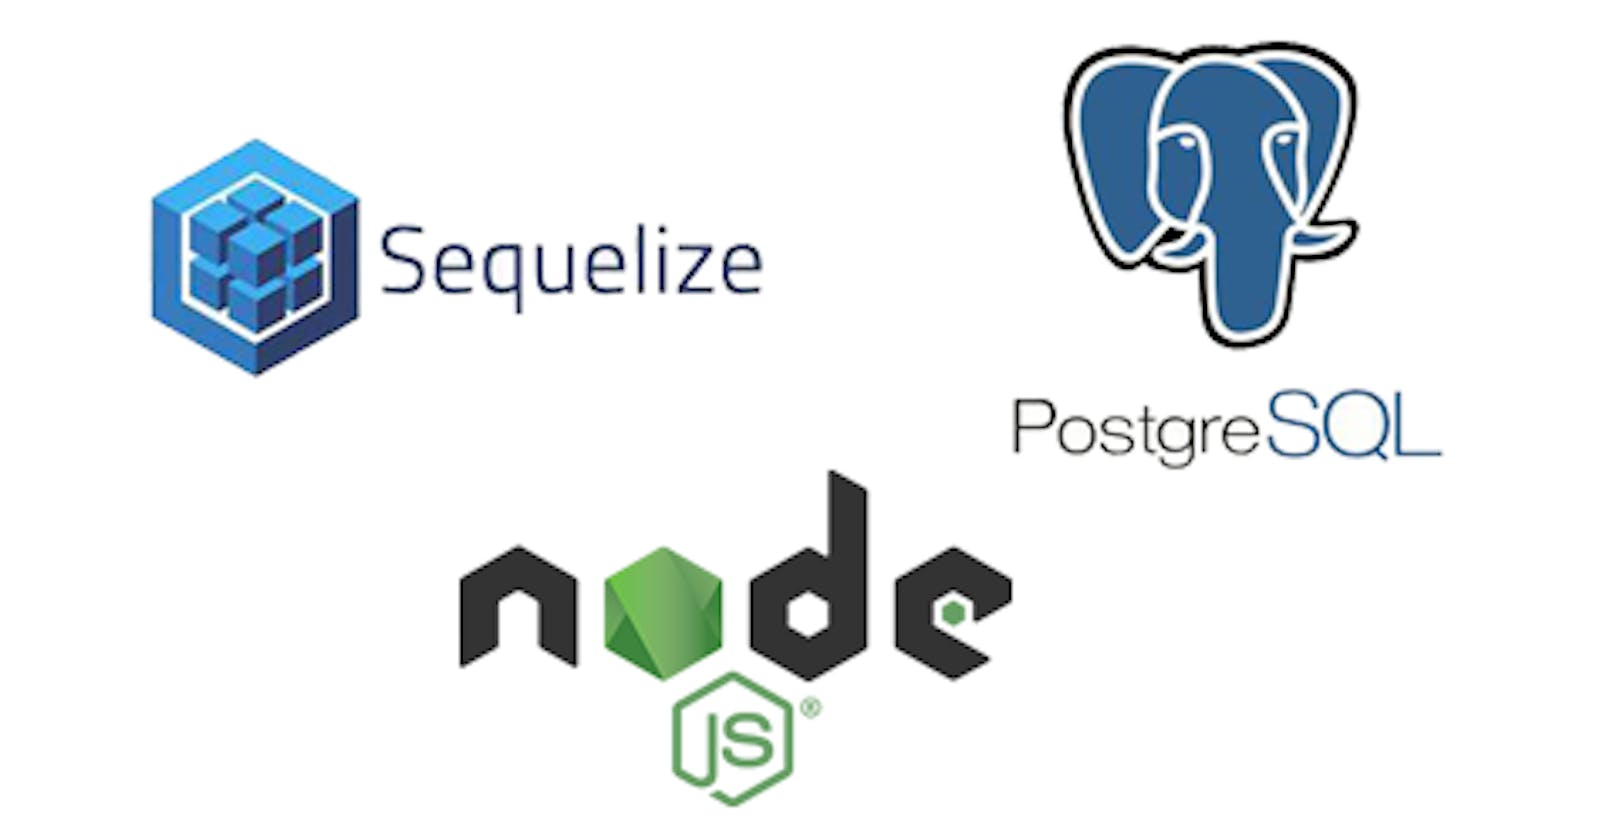 Getting Started with Sequelize-cli and PostgreSQL in Node.js